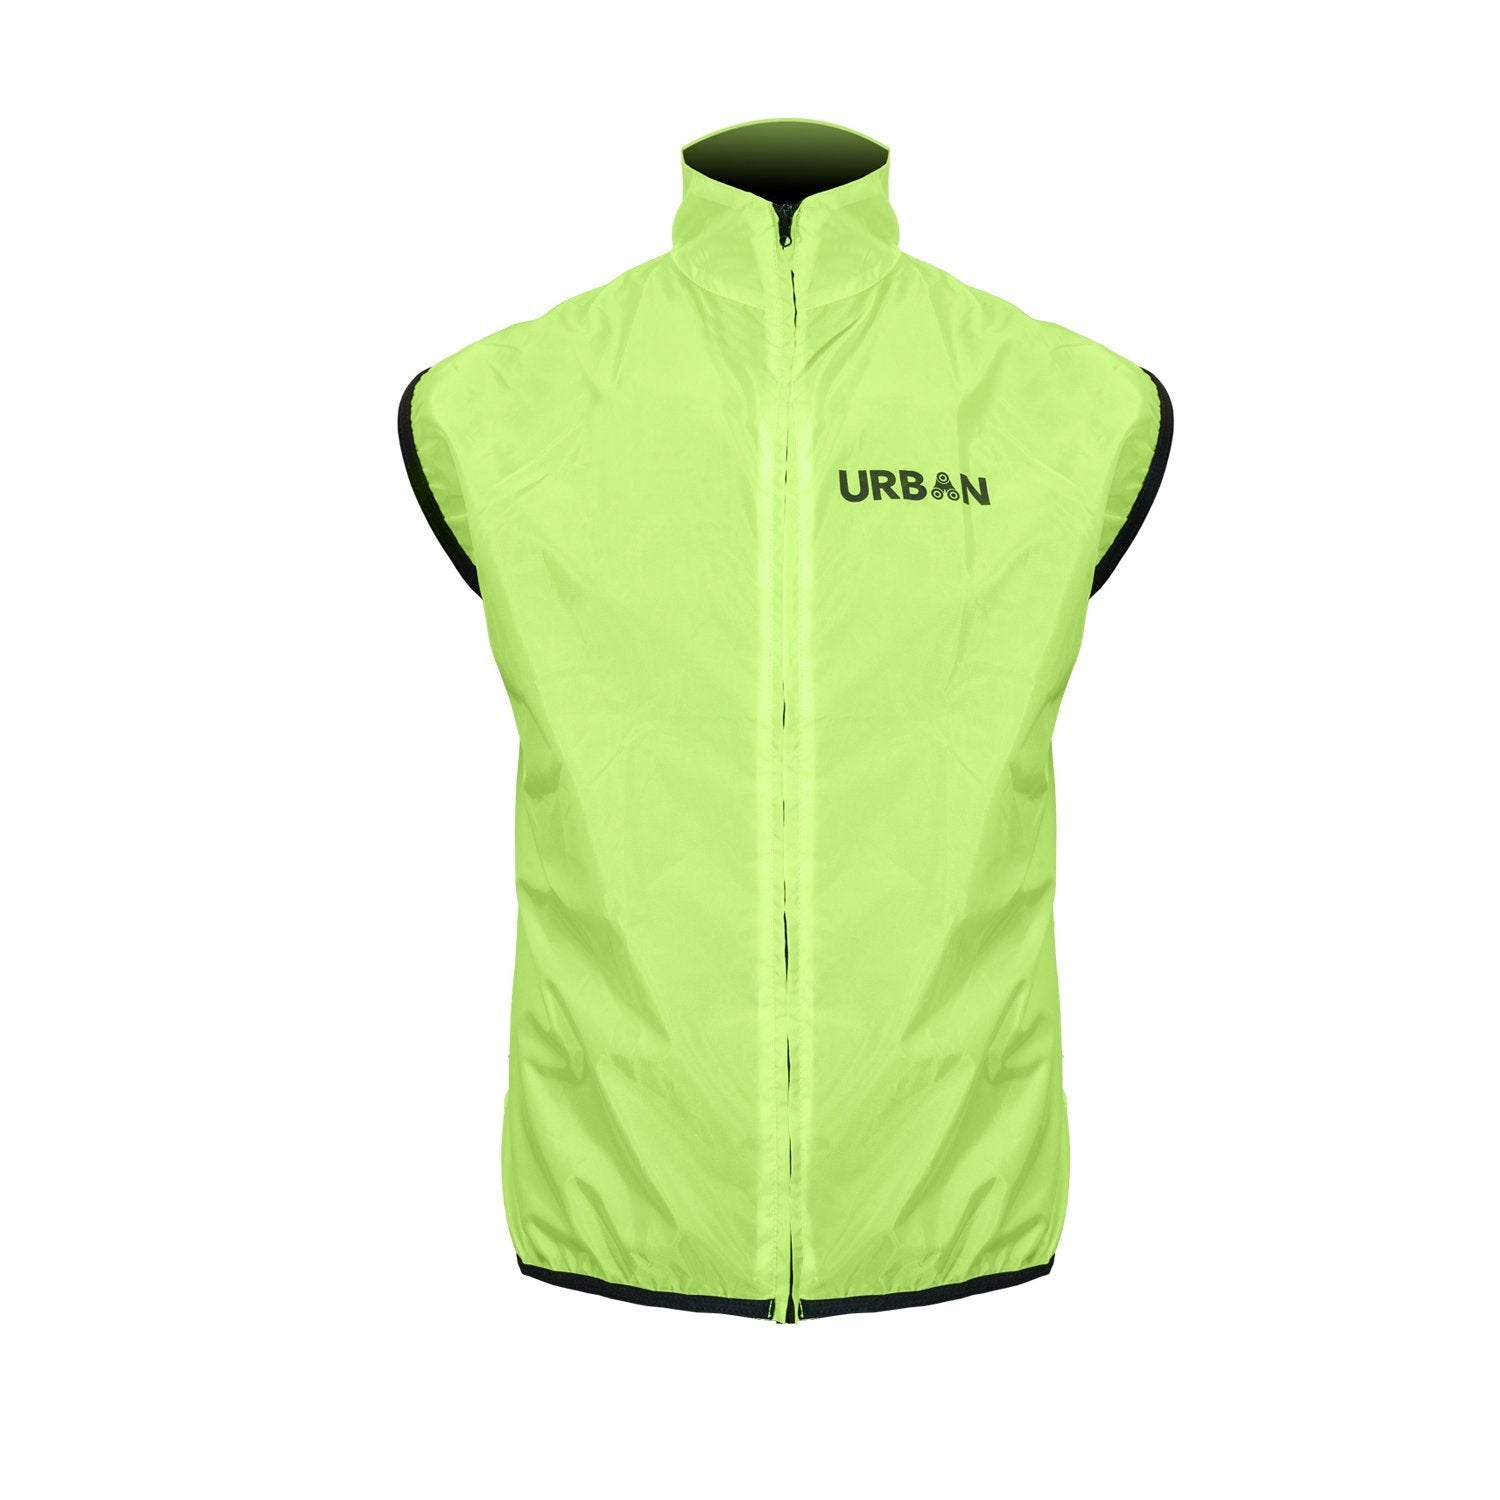 Safety Yellow Cycling Vest